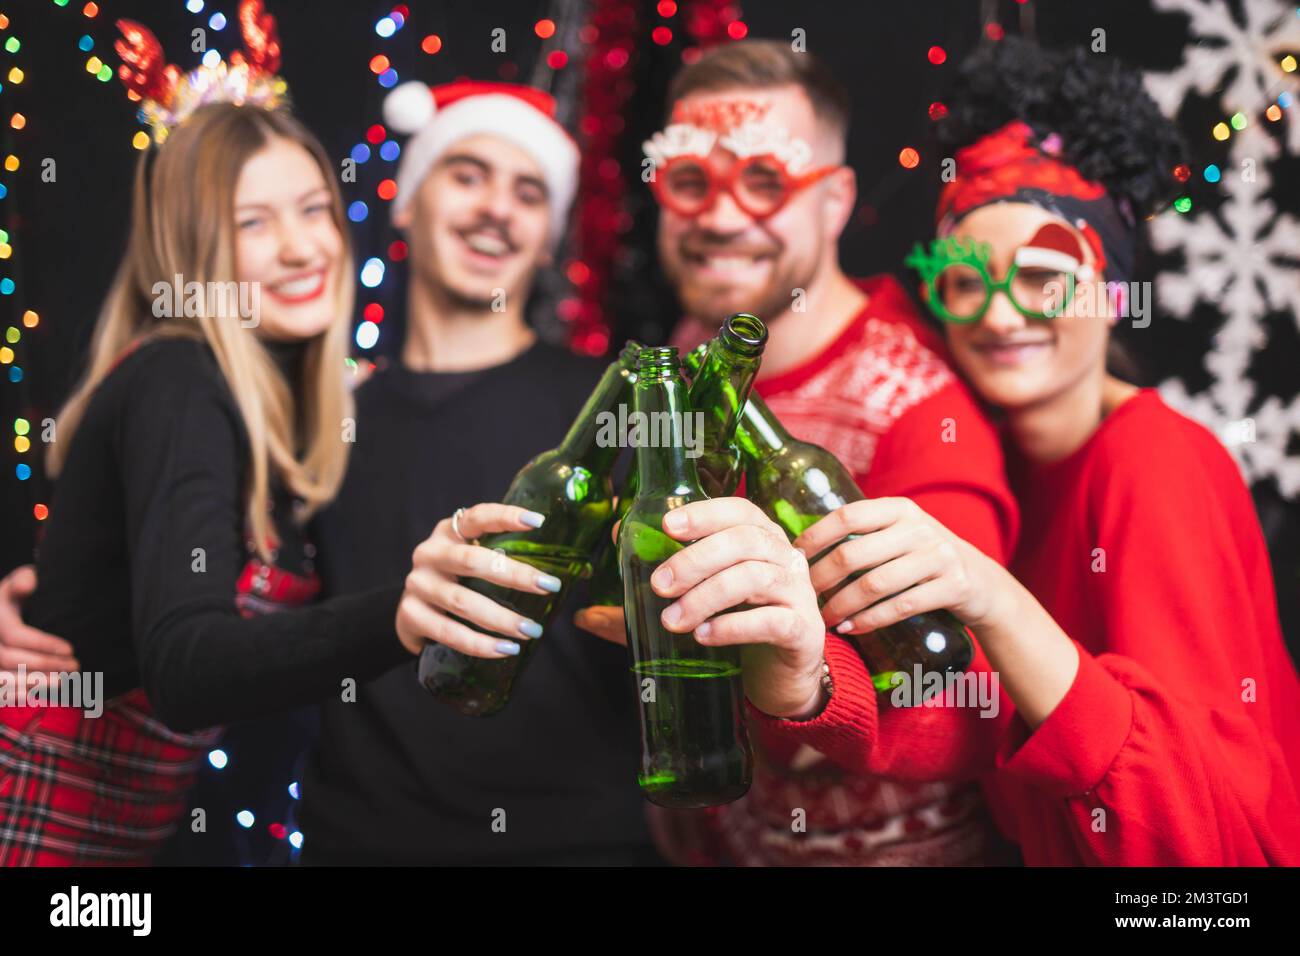 Four friends celebrating New year toasting with beer bottles. Focus on bottles Stock Photo